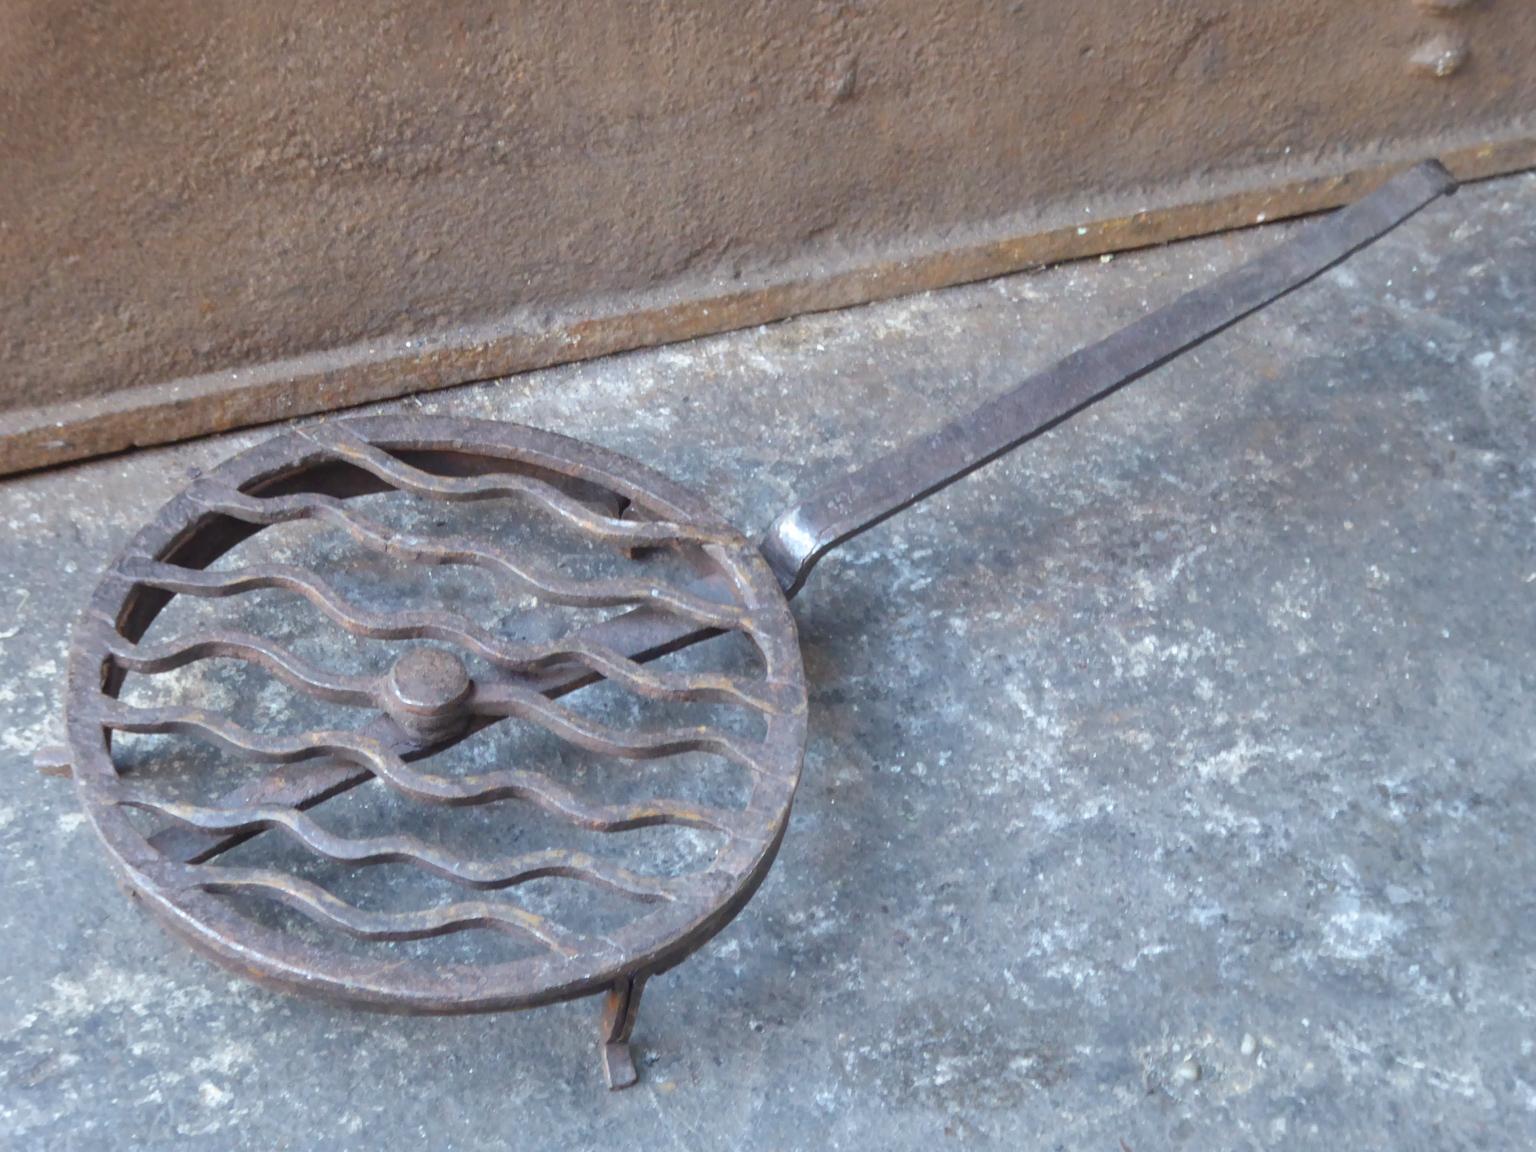 18th century French Louis XV rotating gridiron made of wrought iron. To prepare small pieces of meat quickly over the fire. Sometimes they were put in the fire or else on a trivet, depending on the size of the fire. The gridiron is still fully